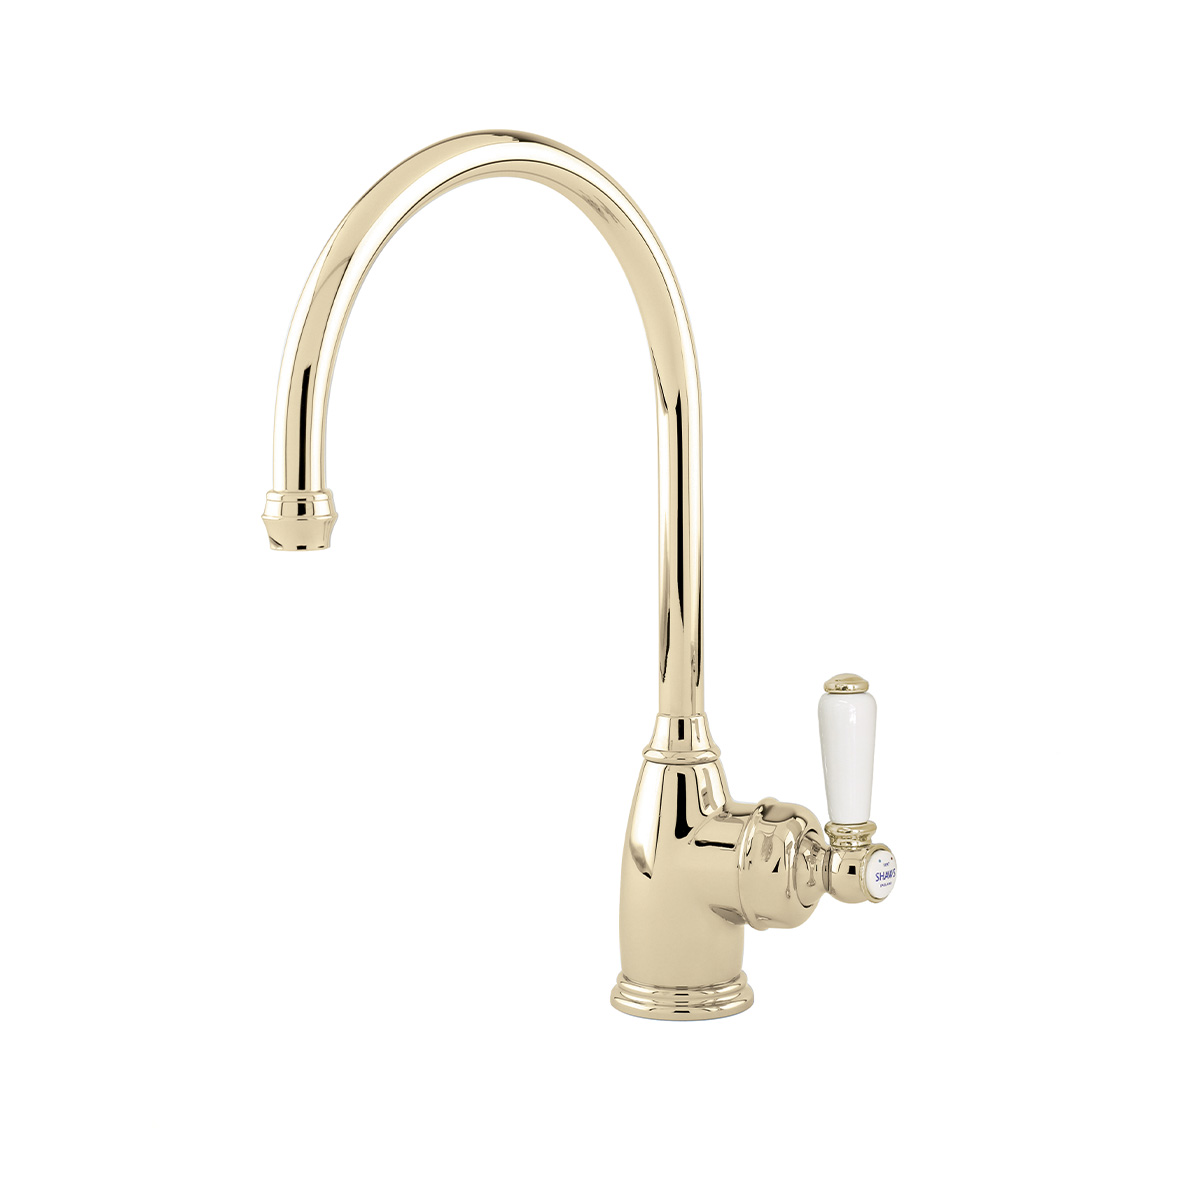 Shaws by Perrin & Rowe Yarrow kitchen mixer in Gold. Parthian style monobloc kitchen tap AUSH.4341. Distributed in Australia by Luxe by Design, Brisbane.